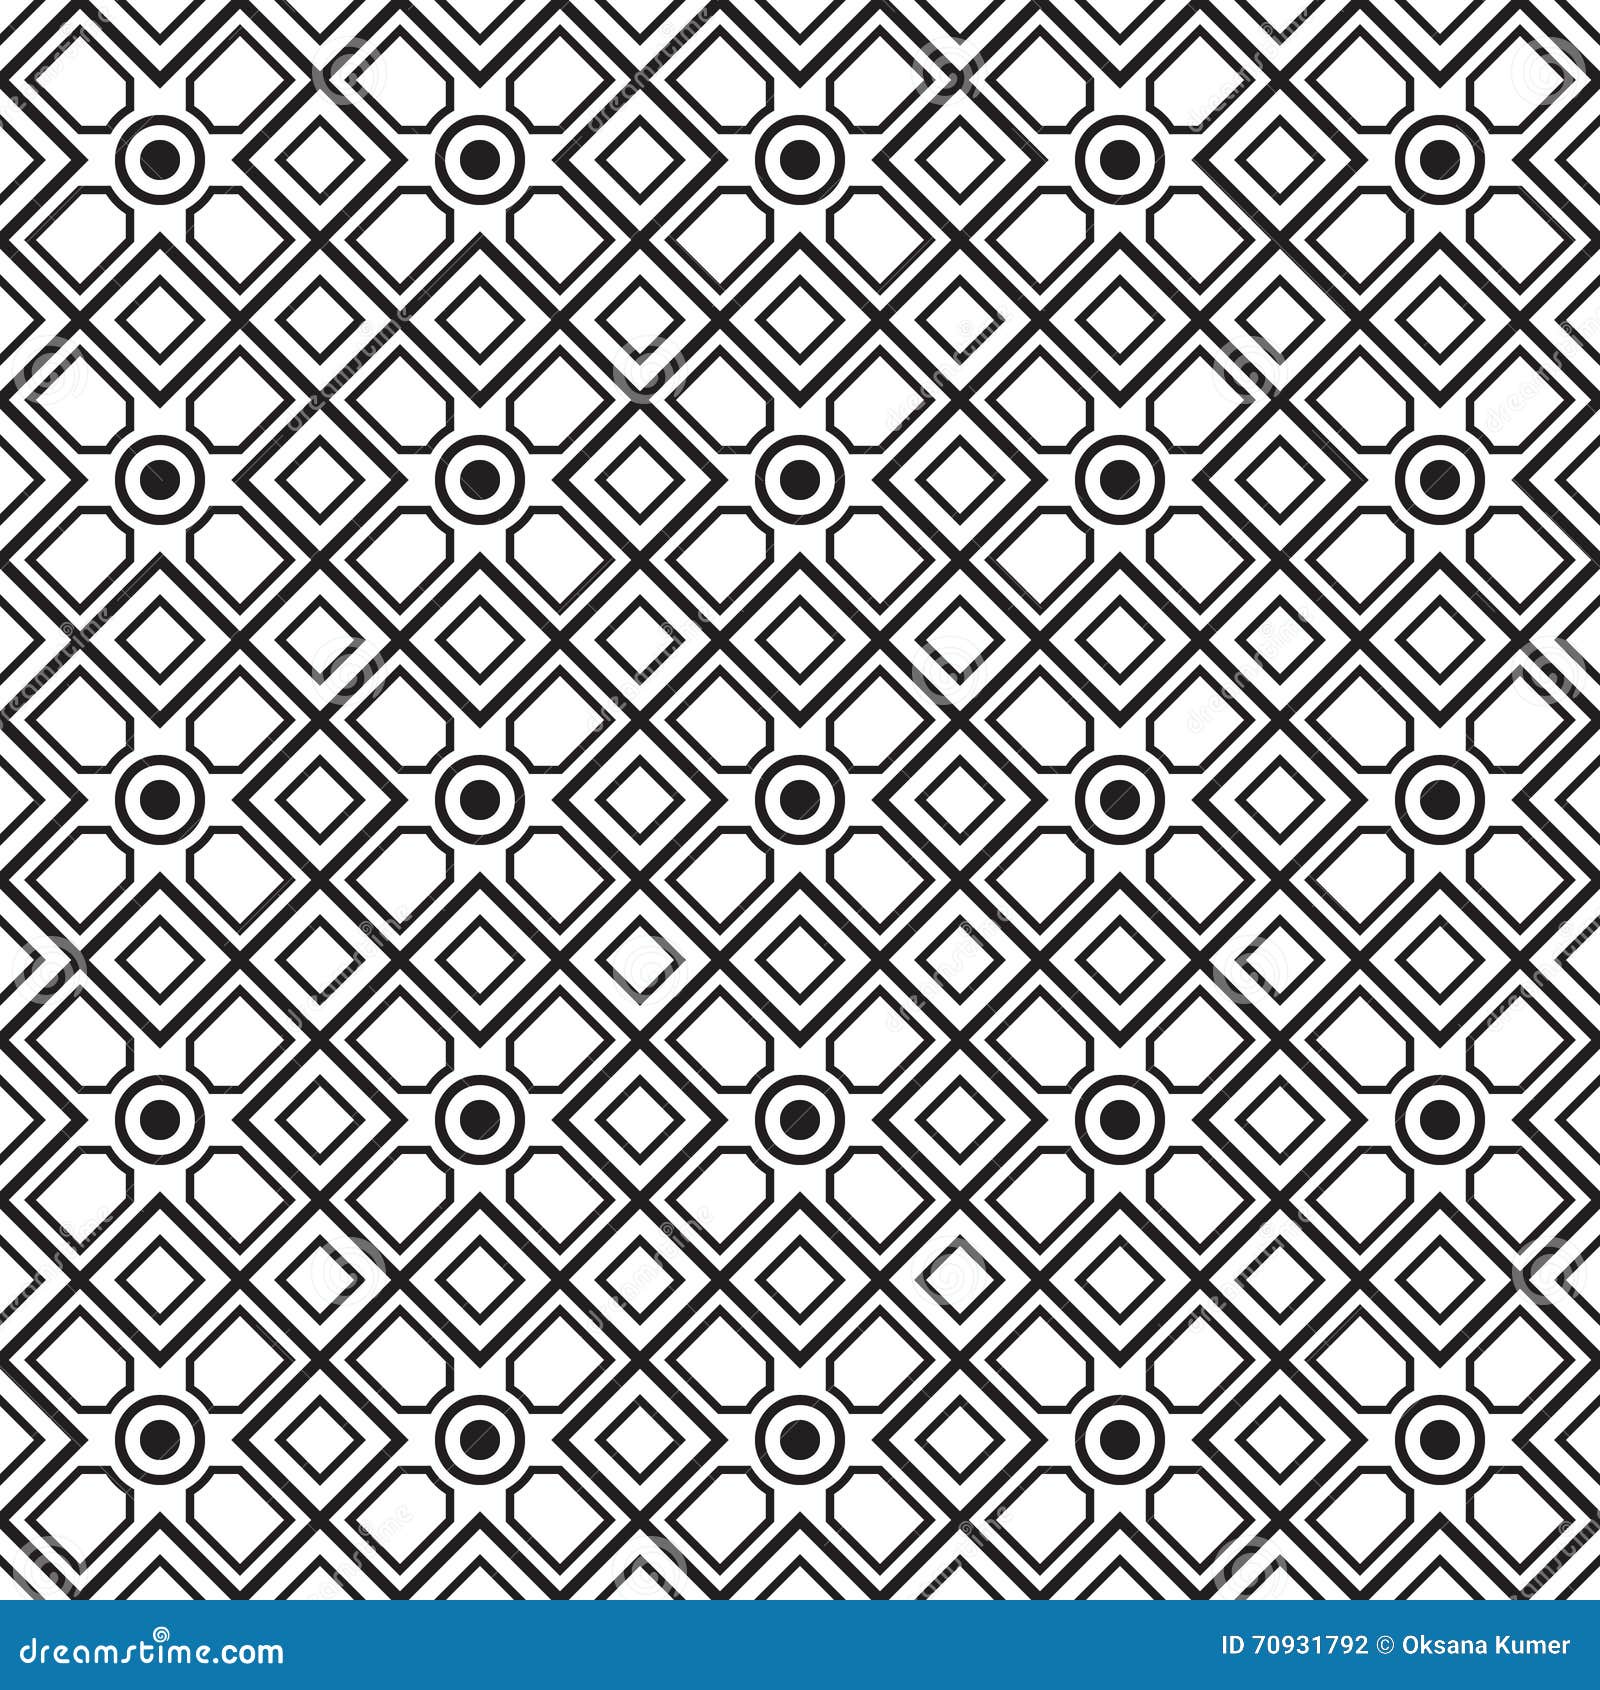 seamless parquetry  pattern background